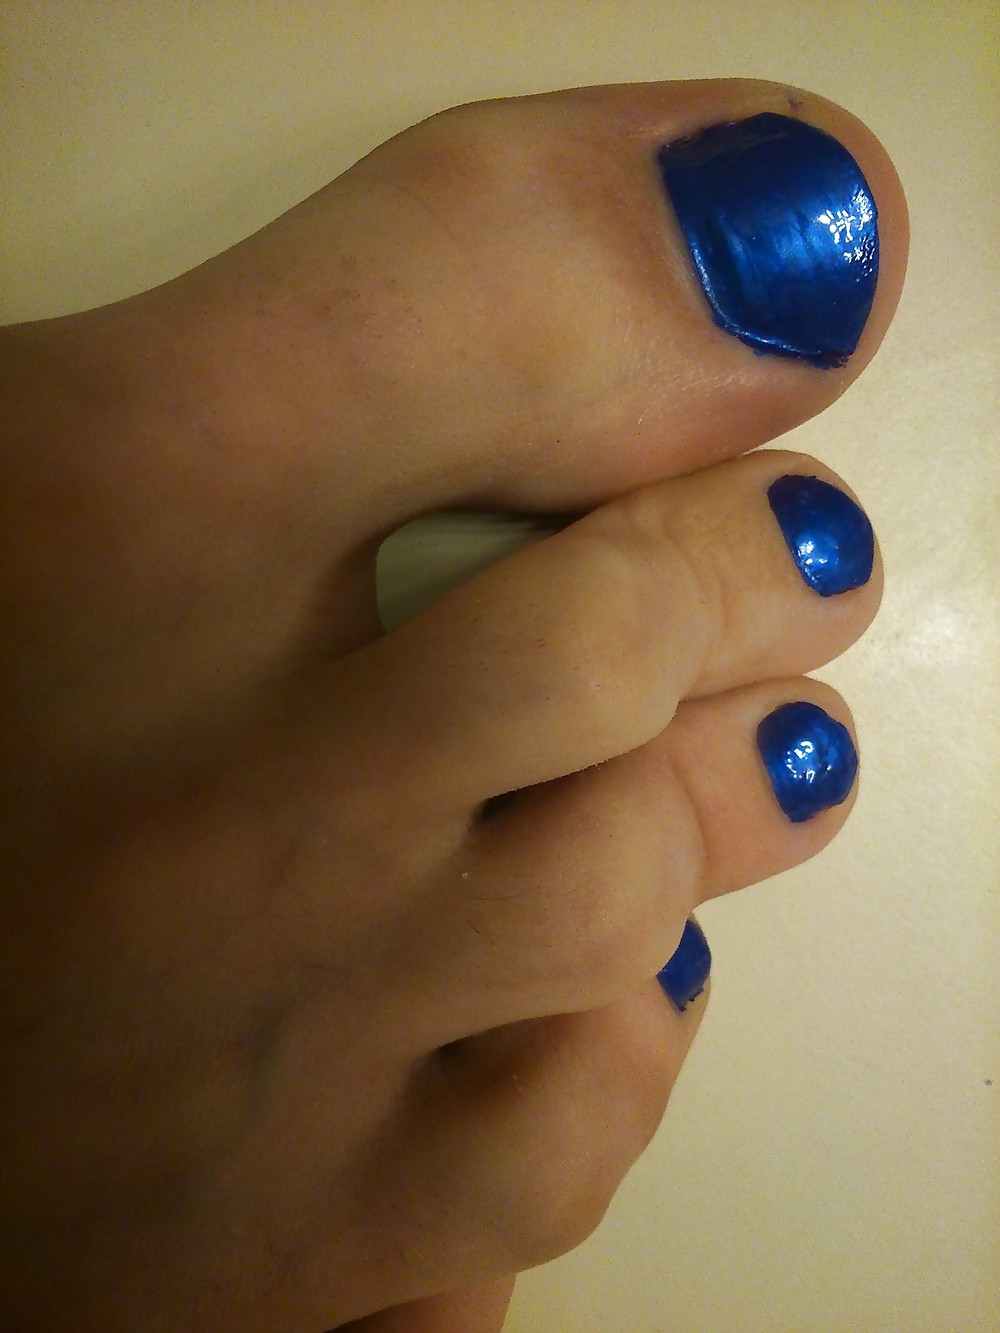 Feet And Toes In Blue Nail Polish And Leather High Heels. #30148031